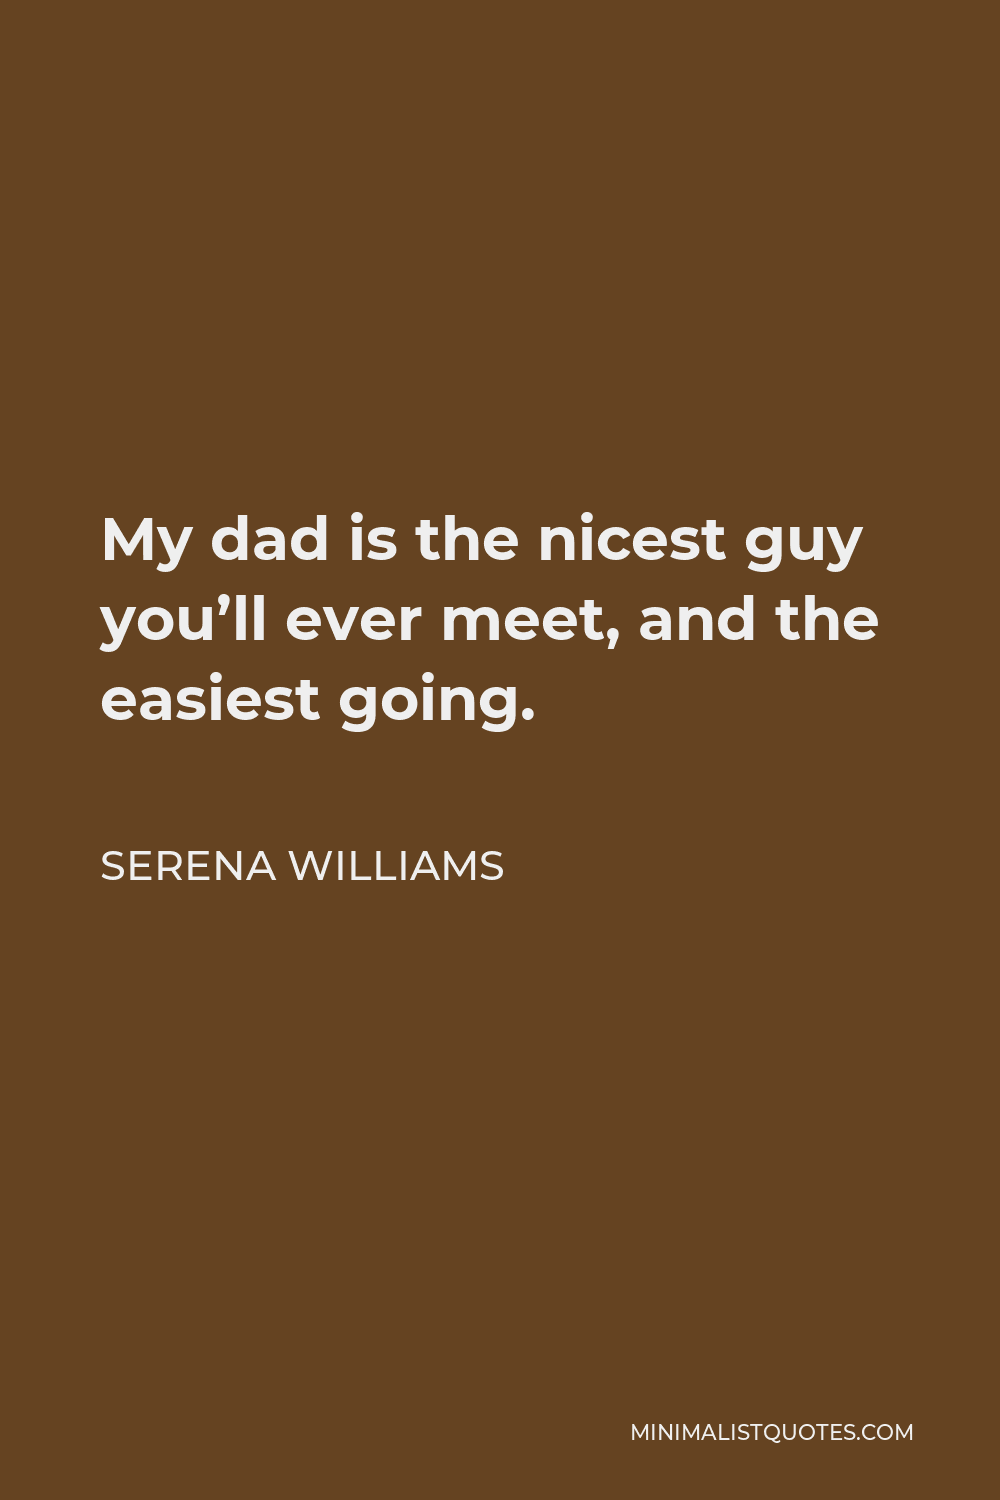 Serena Williams Quote - My dad is the nicest guy you’ll ever meet, and the easiest going.